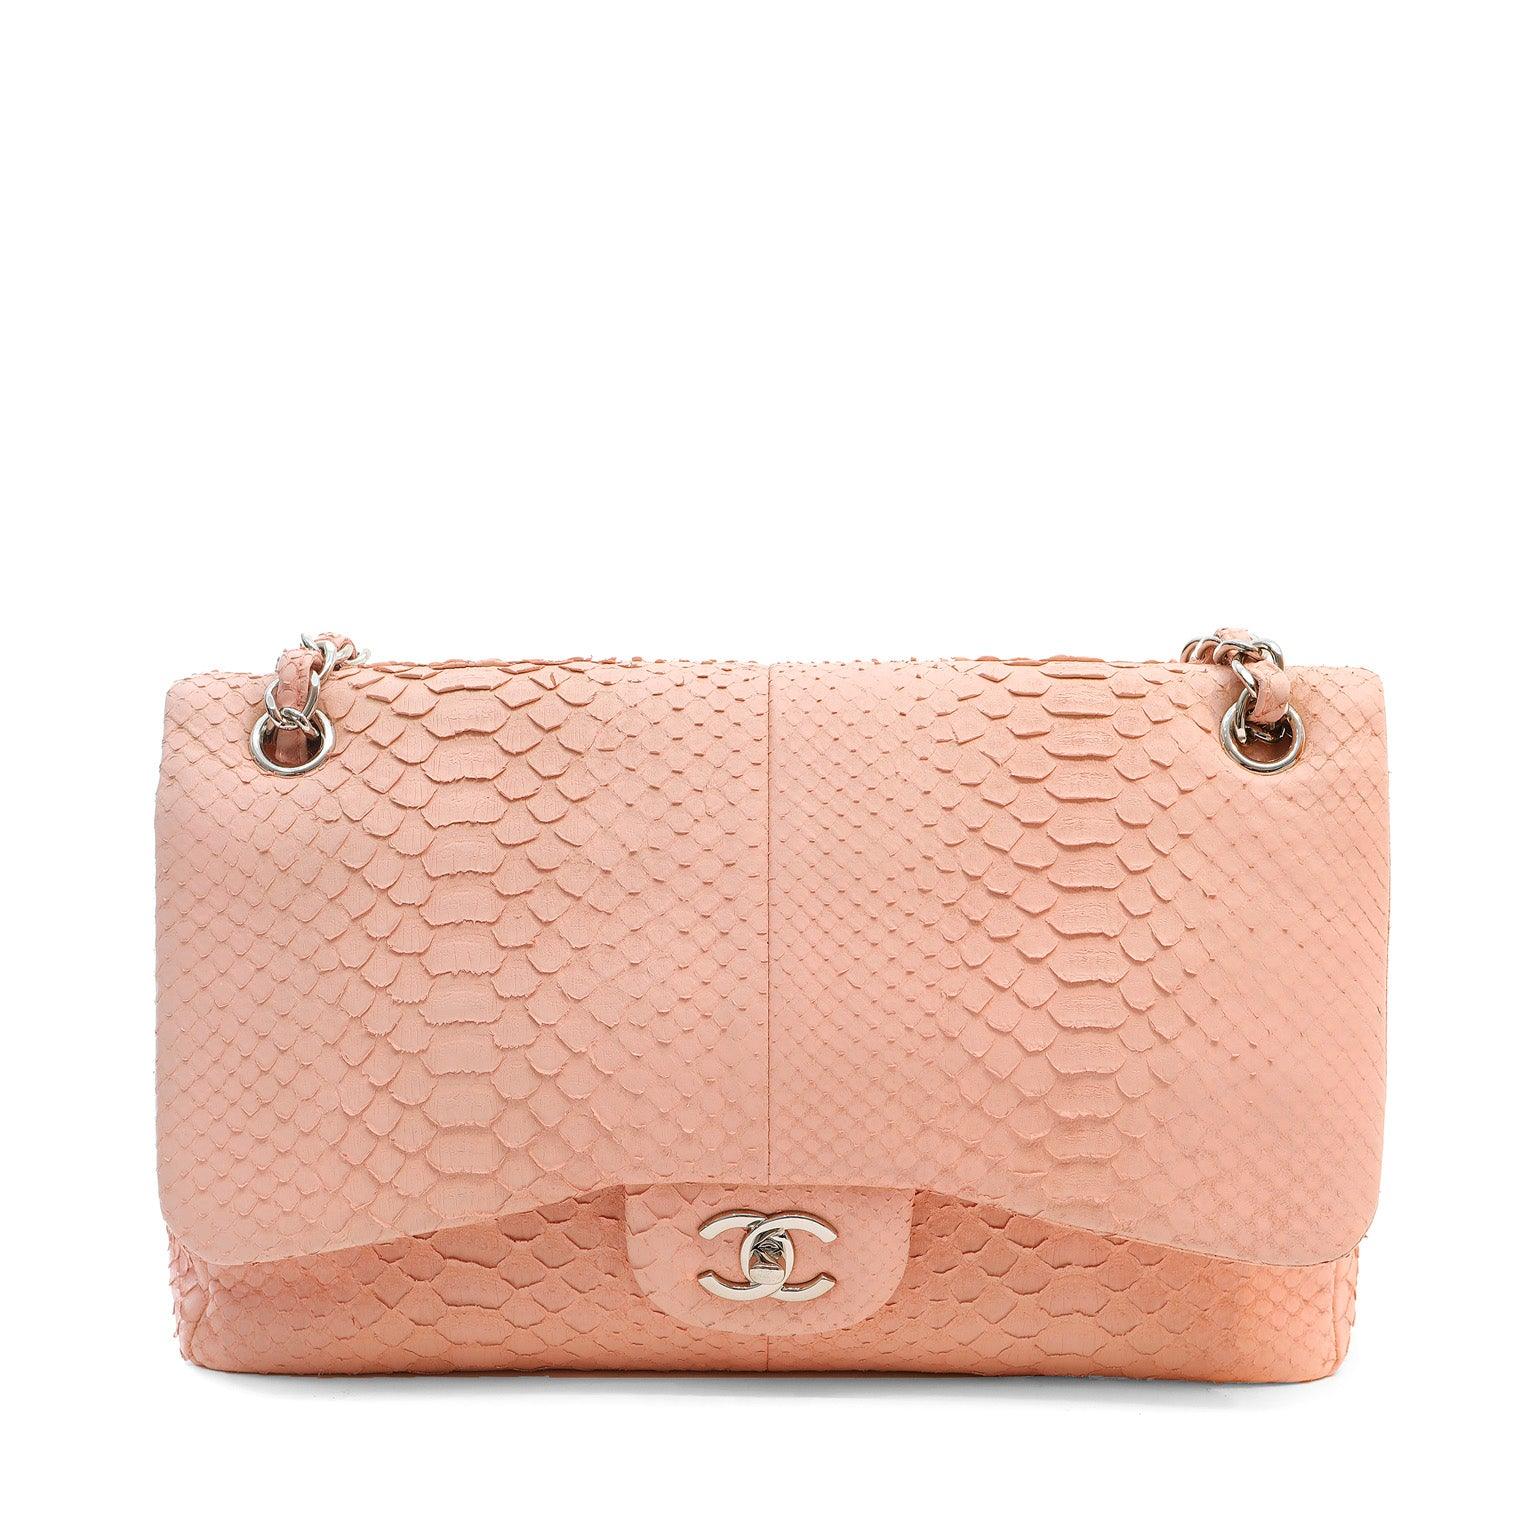 Get your hands on this stunning Chanel Bubblegum Pink Python Jumbo Classic  handbag with Silver Hardware – Only Authentics